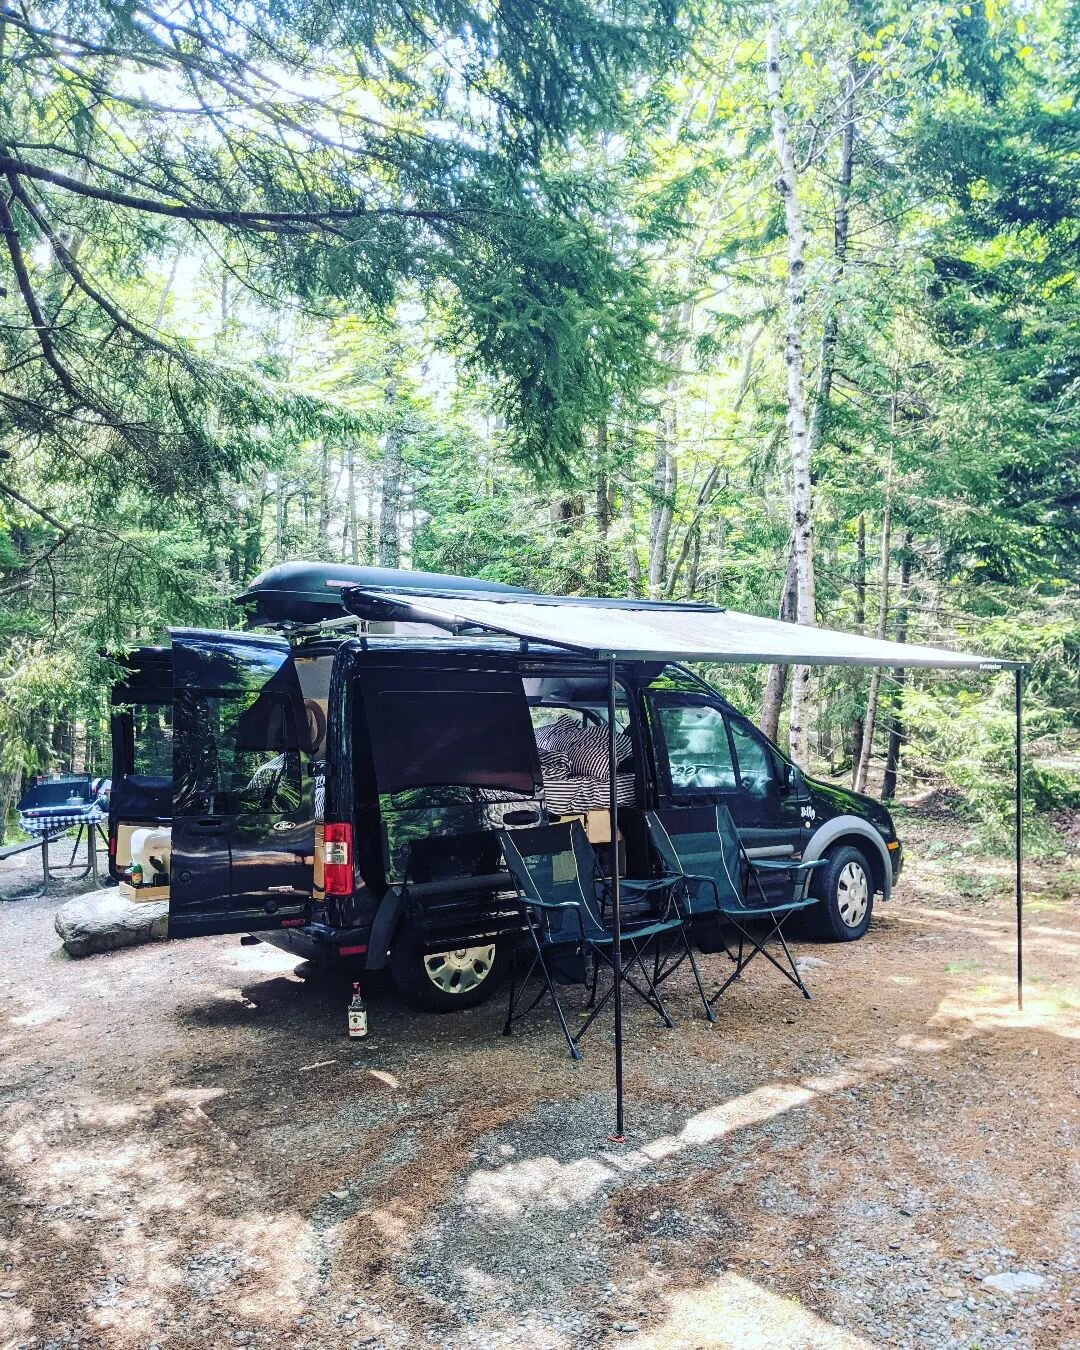 Camping's a breeze in our fully outfitted van rentals. Queen sized bed, kitchen, storage &amp; awning make any site feel like home. Dates are still available for summer travel.